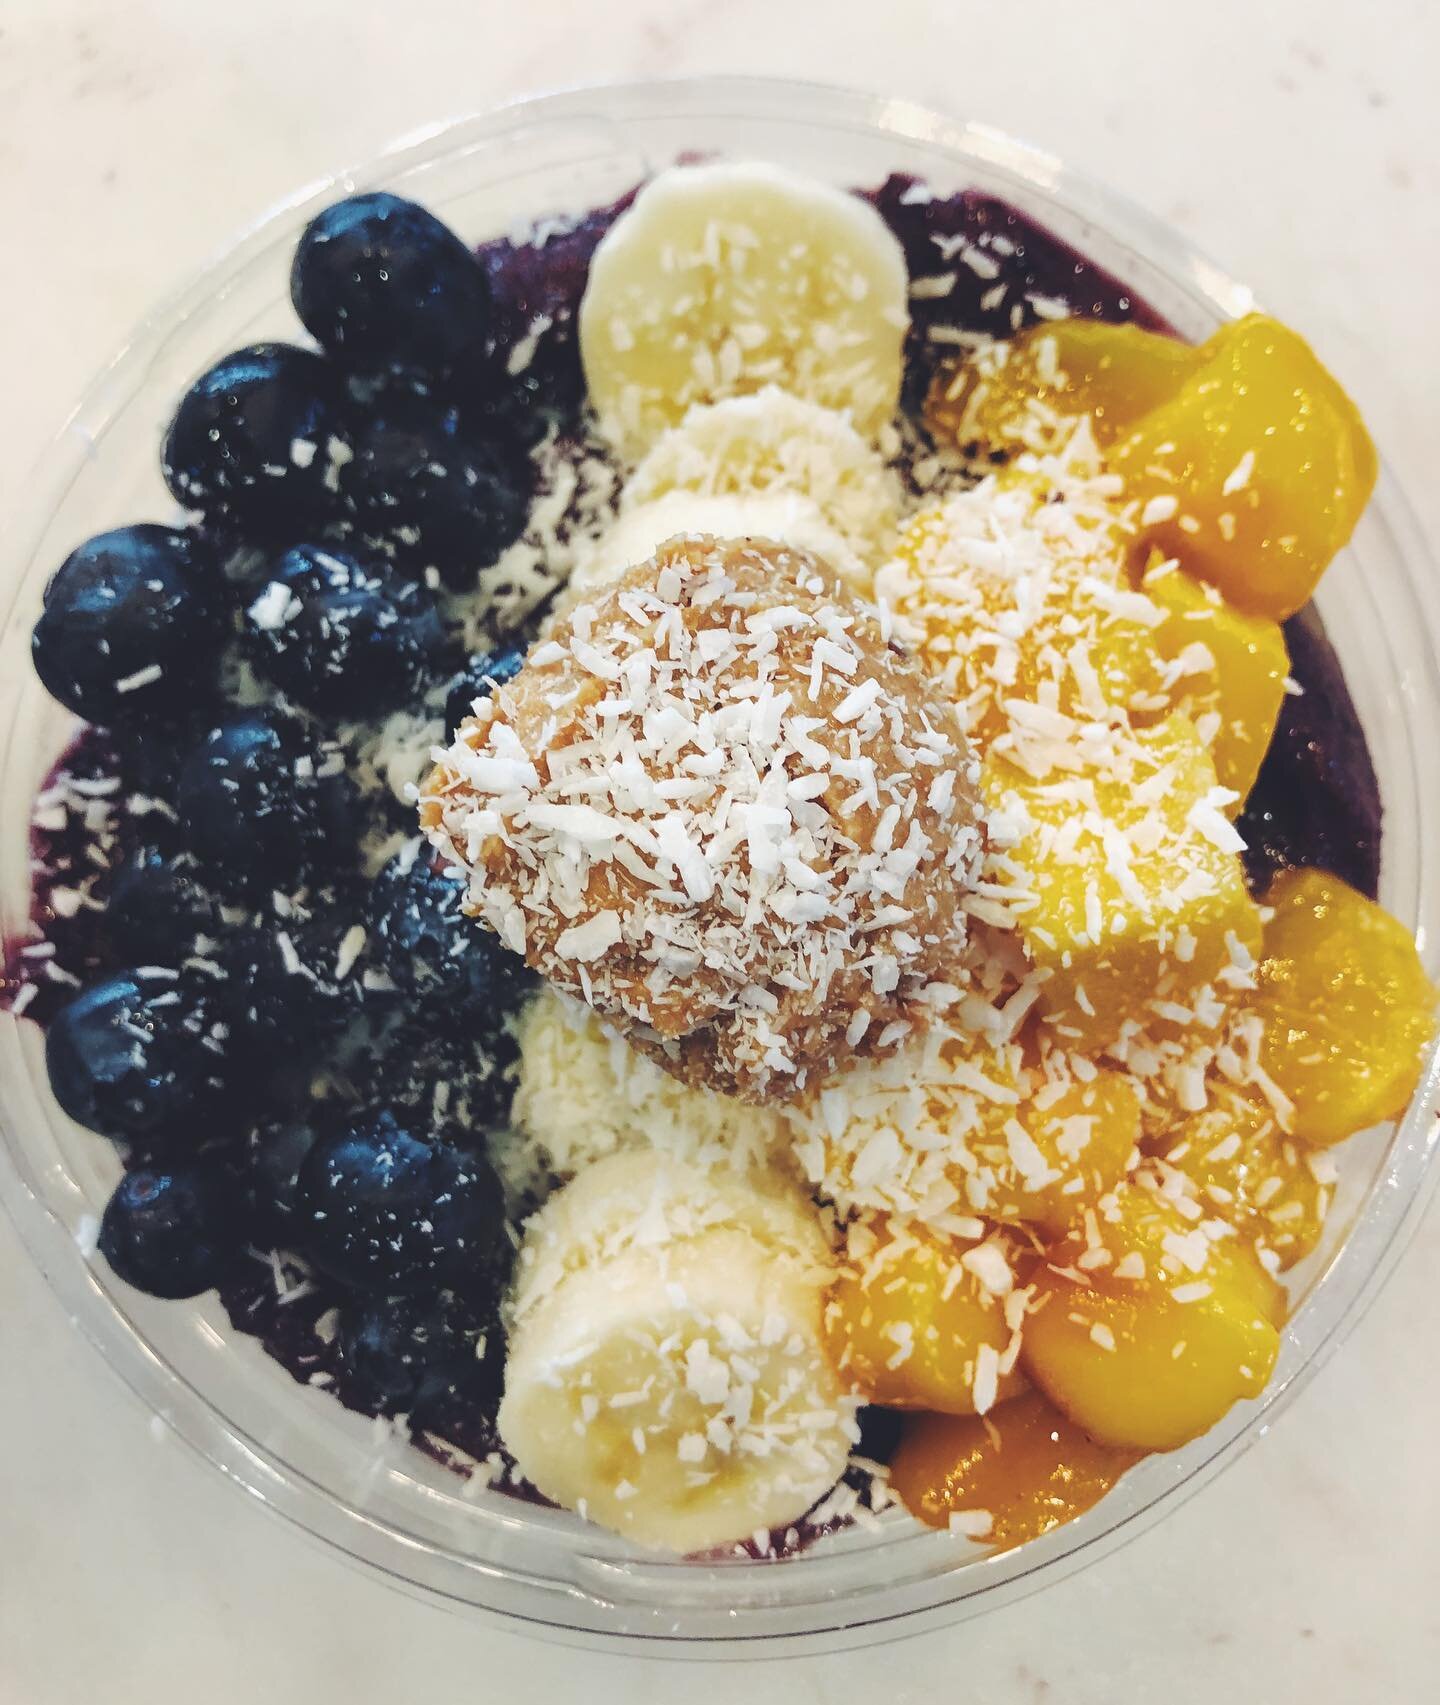 Oh, hey. Just a reminder that you can customize your a&ccedil;a&iacute; bowls whichever way you dang please! E.g., if you want coconut and mango added on top (that&rsquo;s probably a good idea), you can just let us know. Or perhaps you want to add so